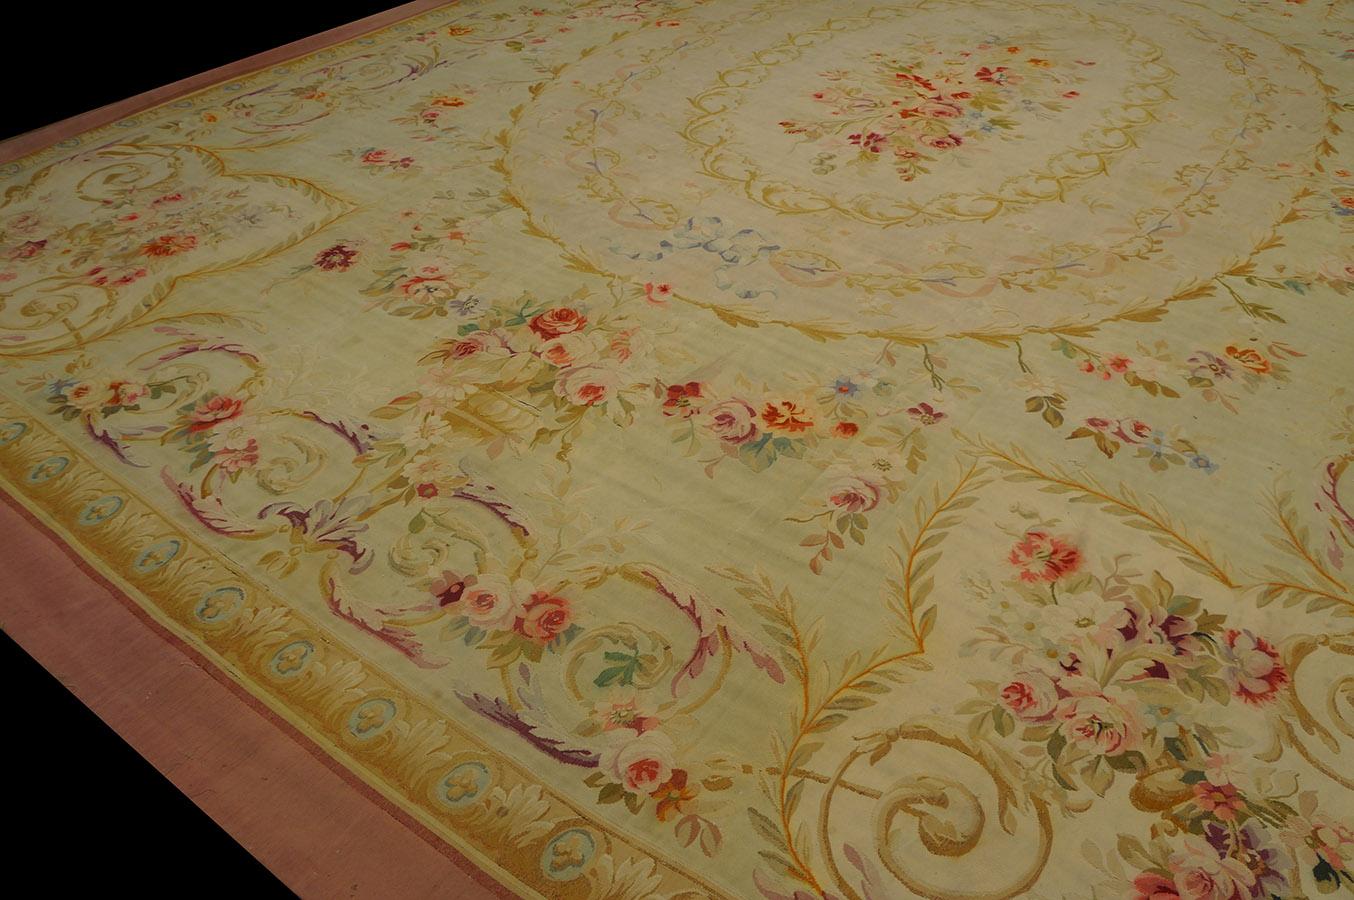 Early 20th Century French Aubusson Carpet ( 14'5' x 20'9'' - 440 x 633 ) 3